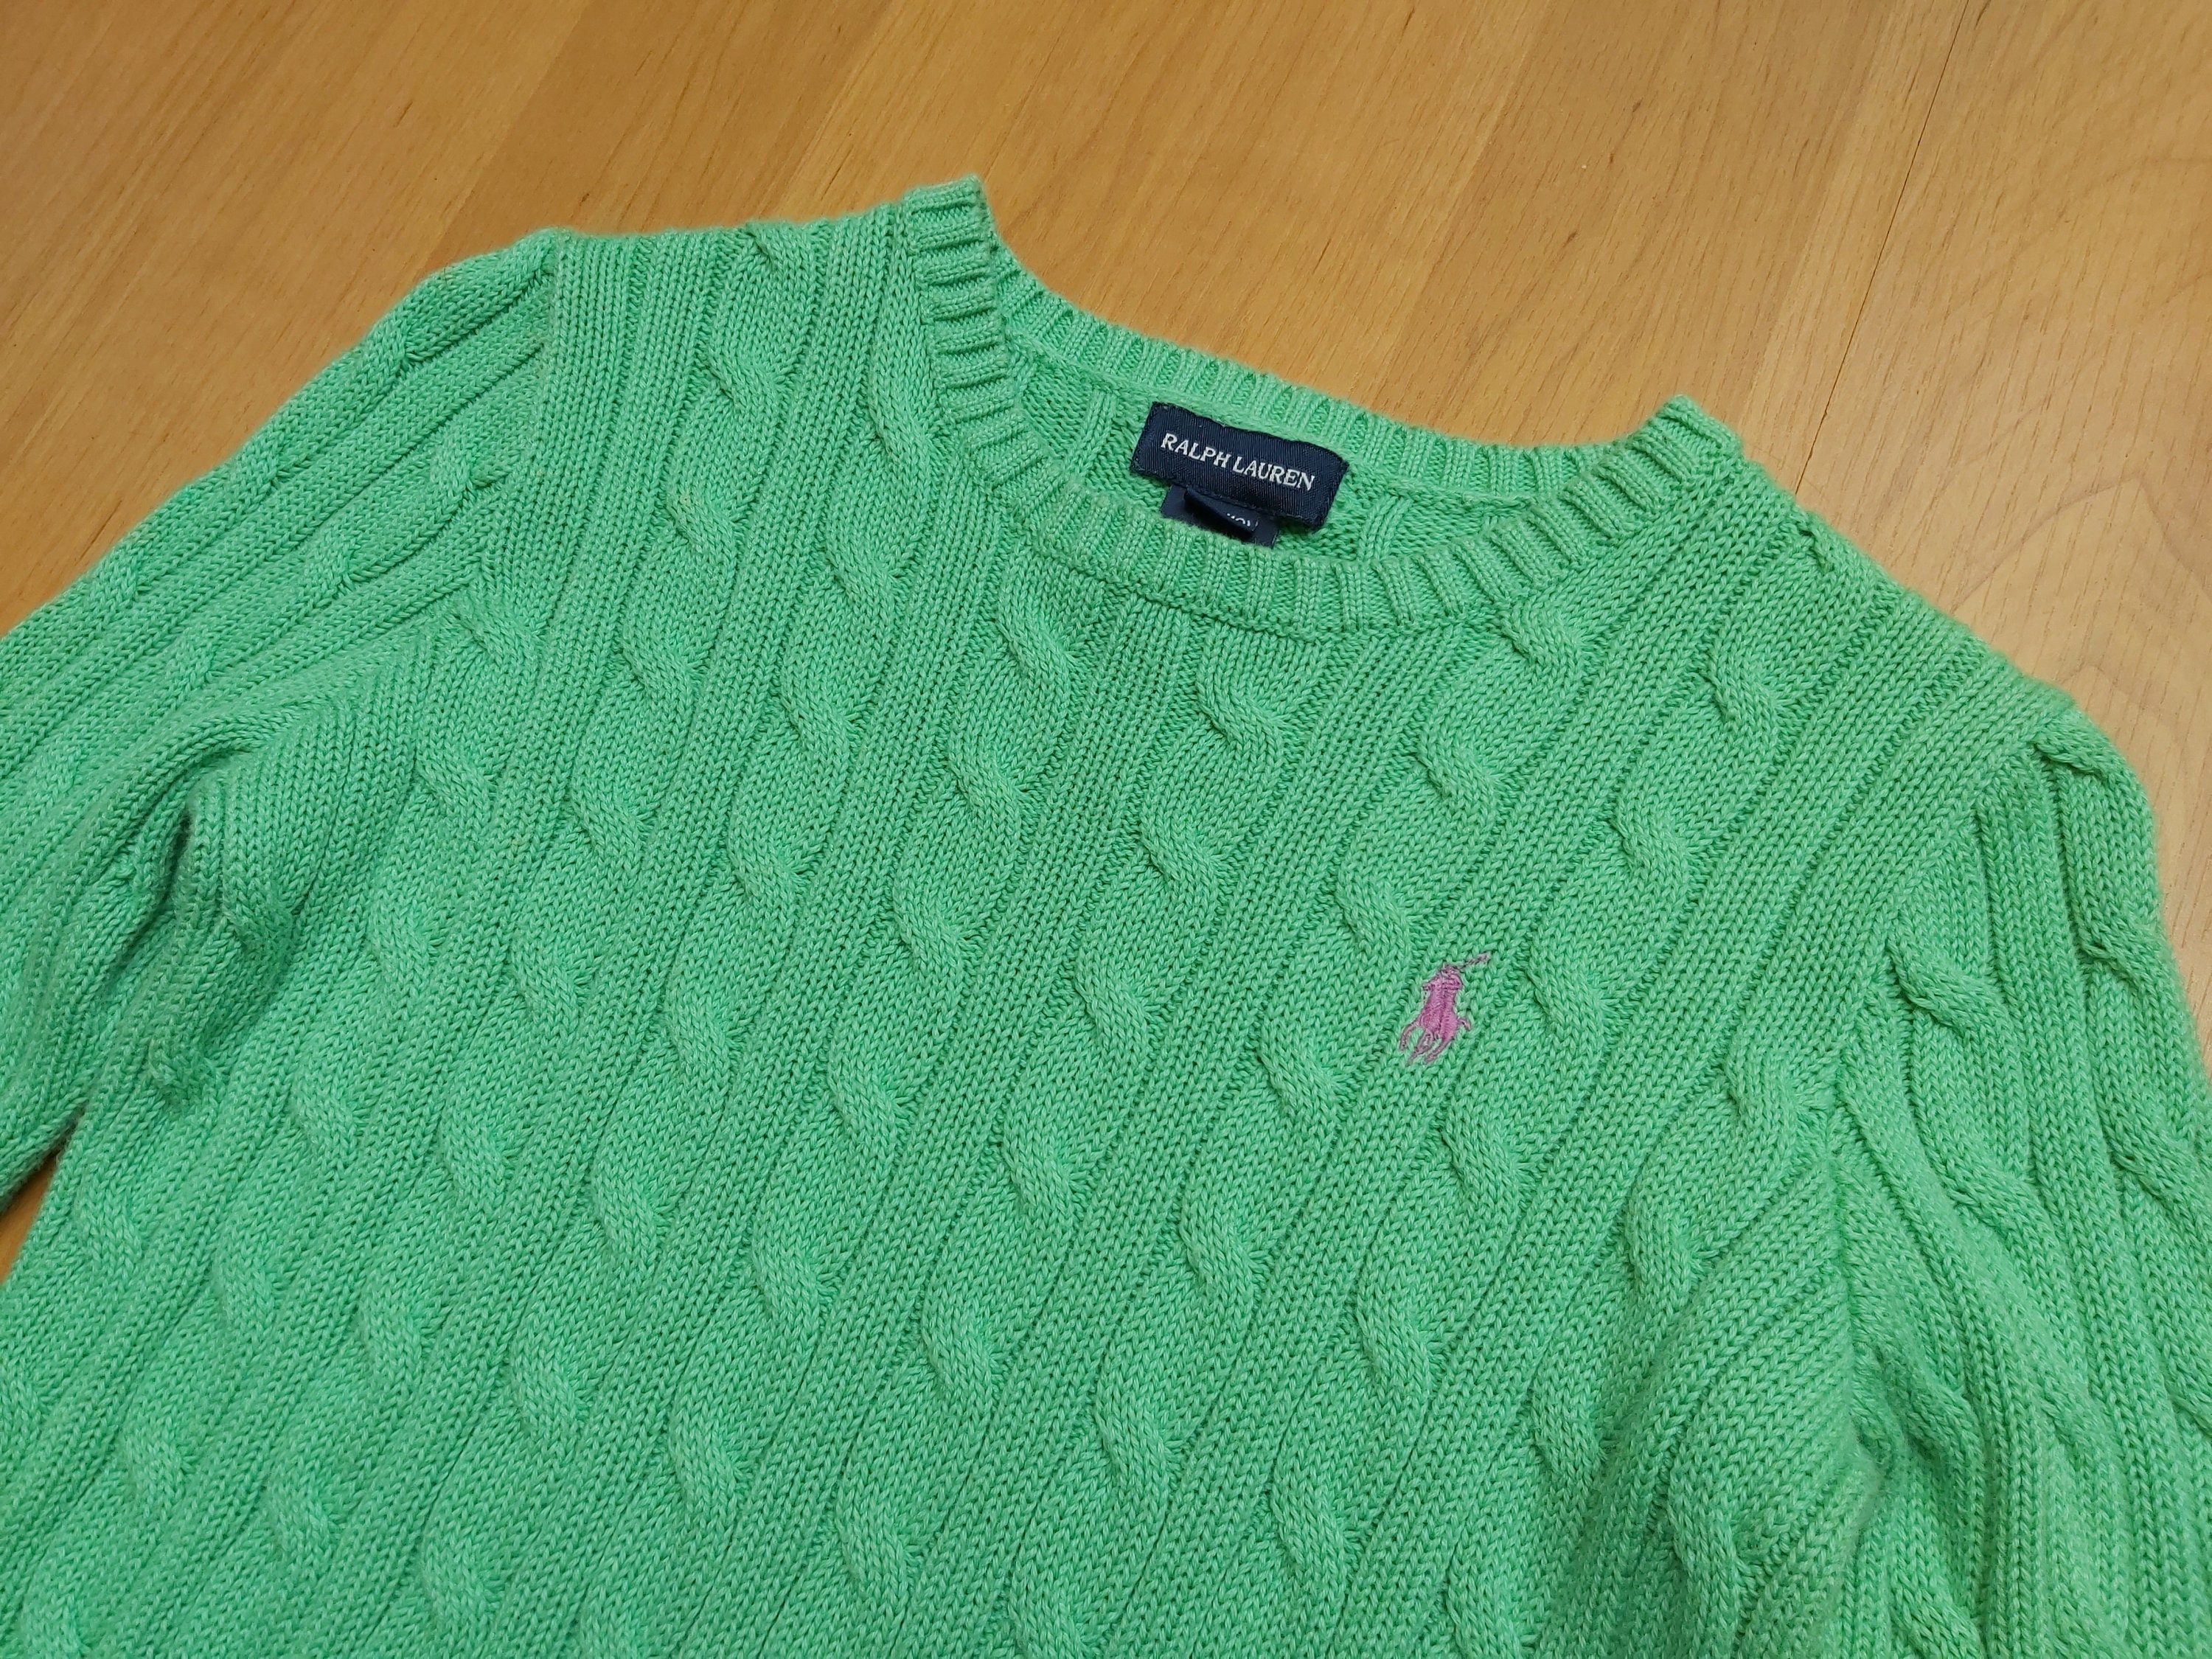 Vintage Polo Ralph Lauren Women's Cable Knit Sweater Green Cotton Crewneck  Jumper Small Pony Logo Knitted Preppy Pullover 1990s Fits Size XS 